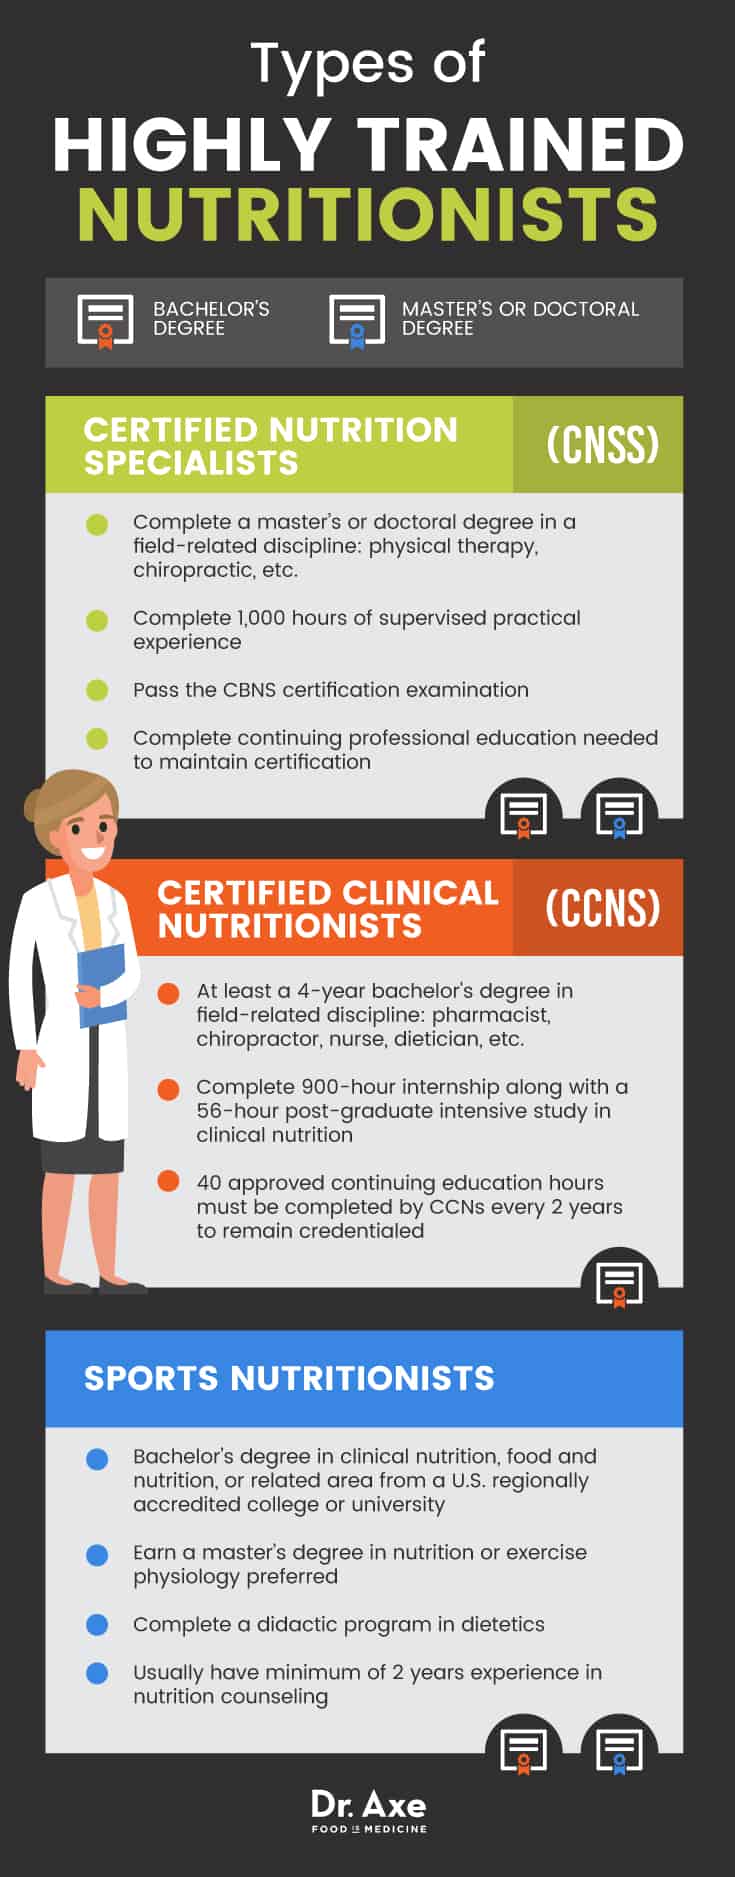 Types of nutritionists - Dr. Axe